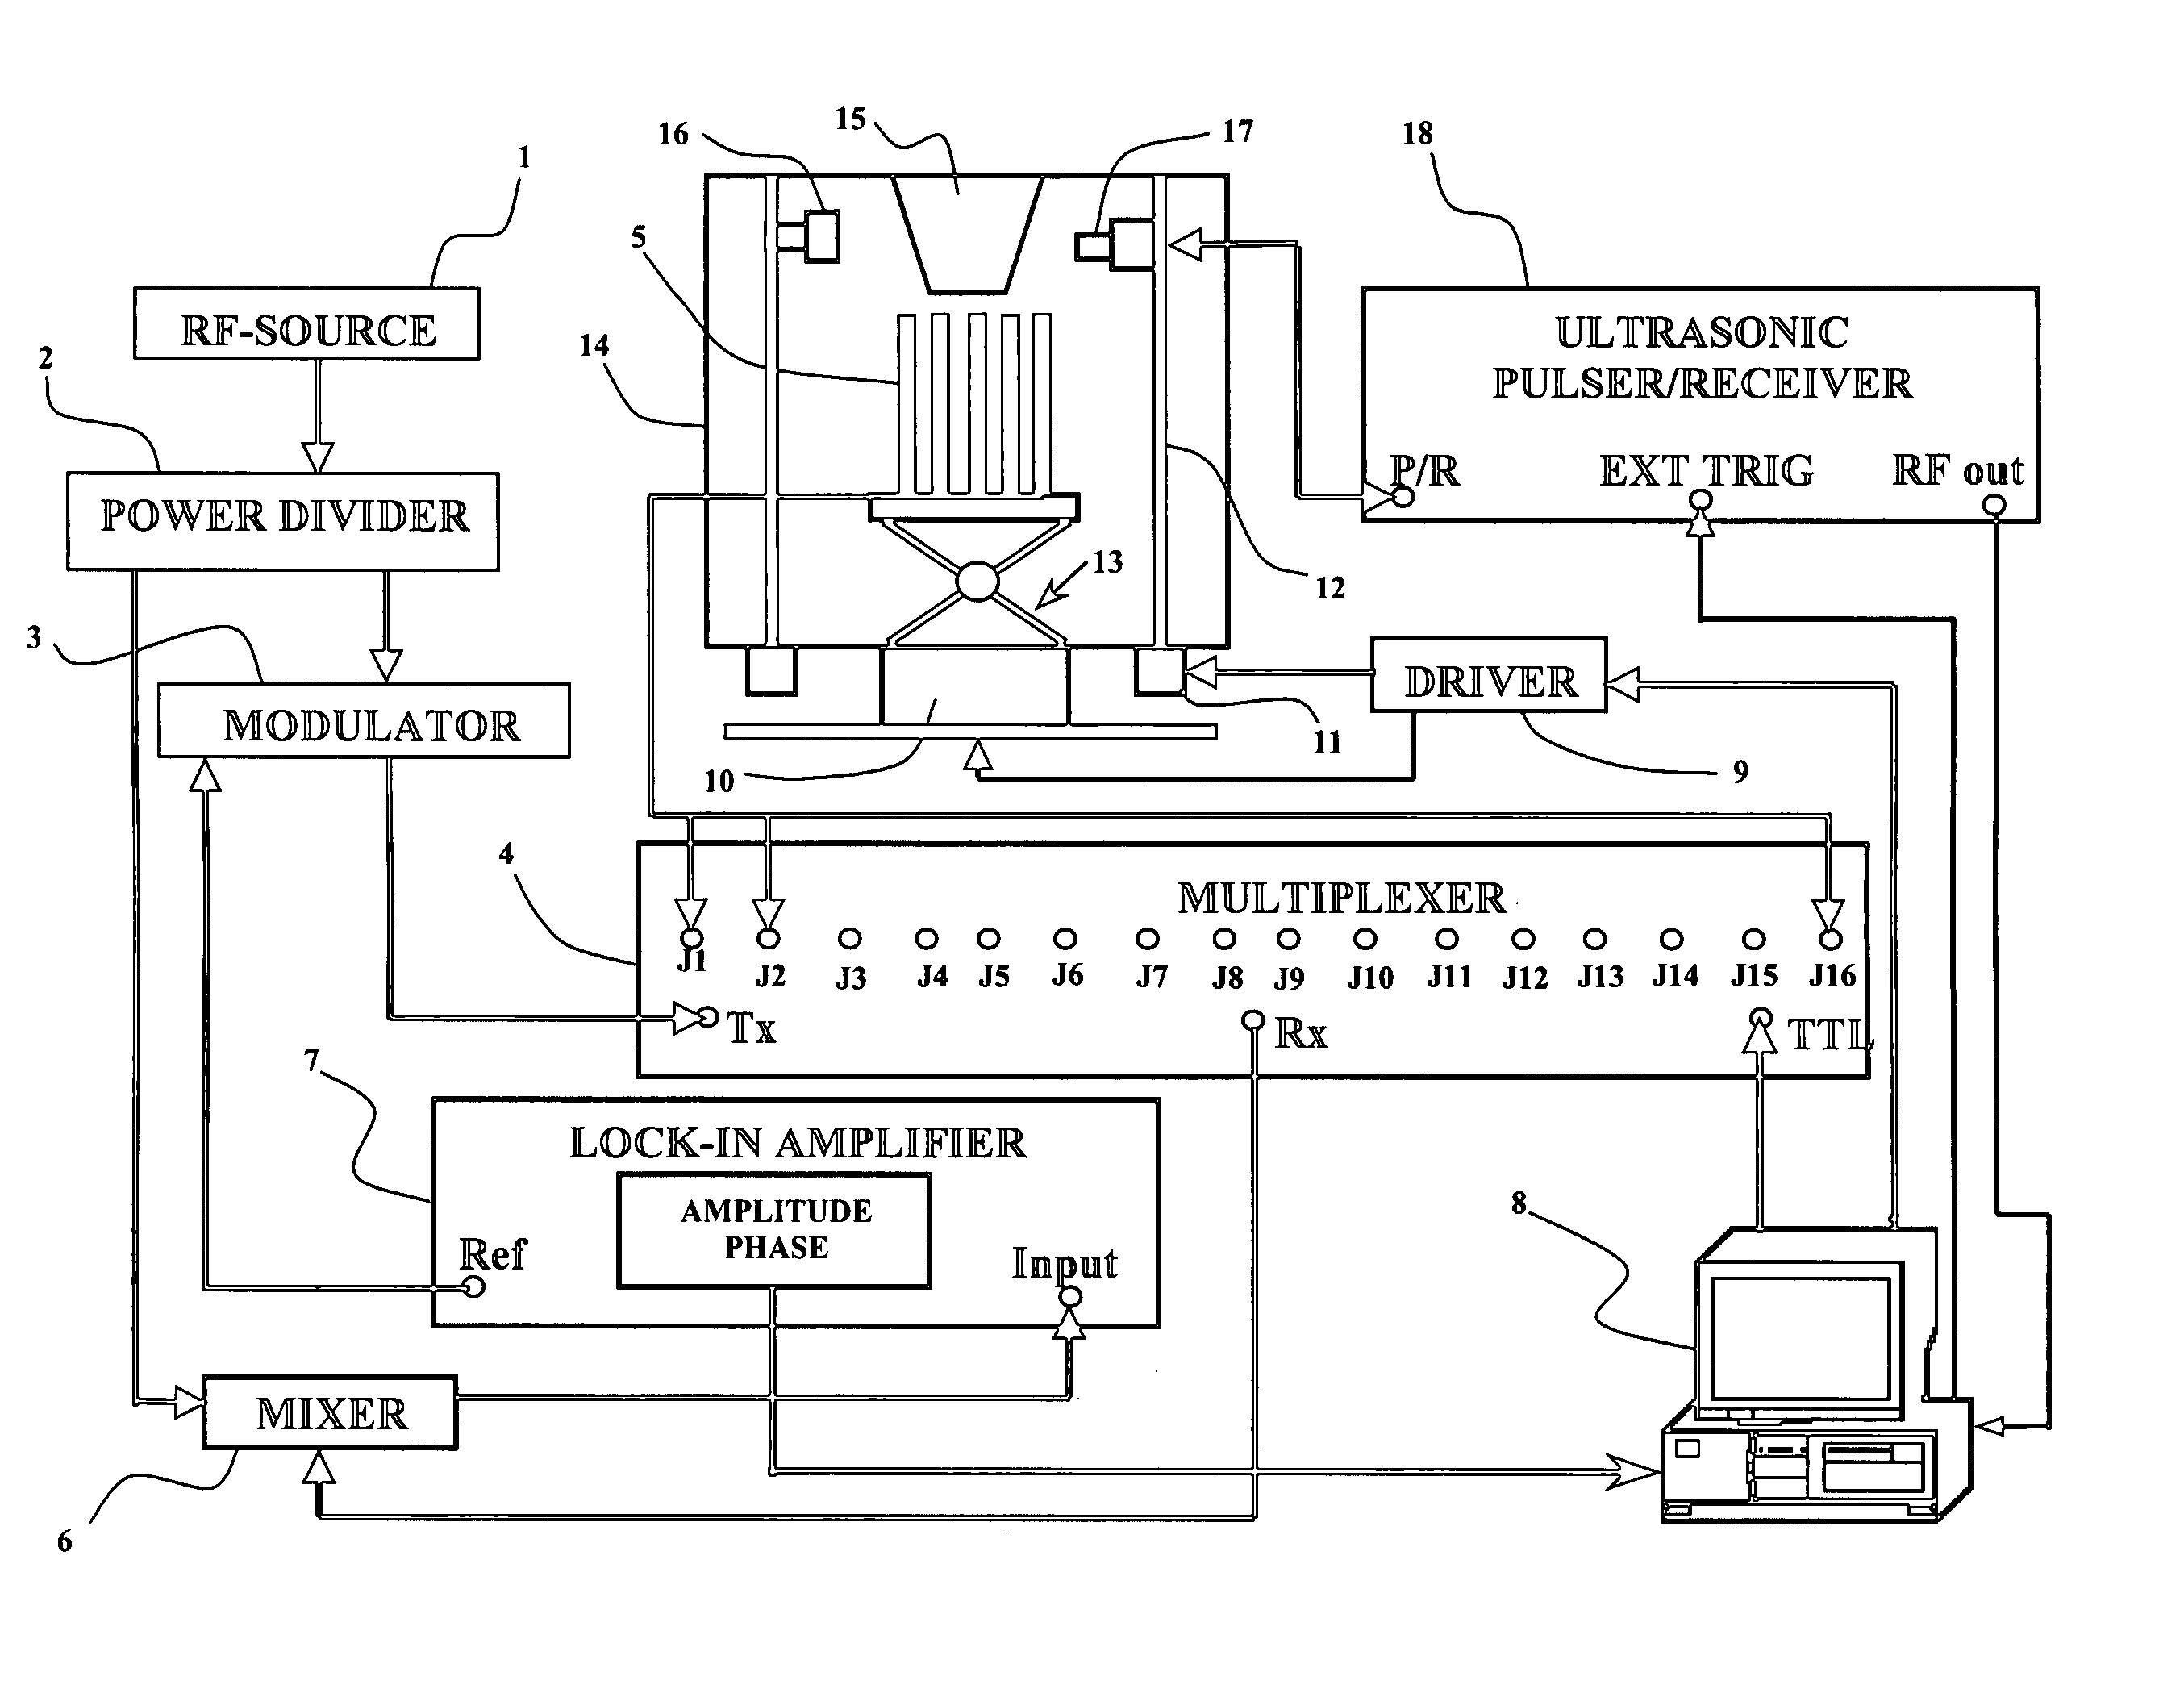 Microwave imaging assisted ultrasonically